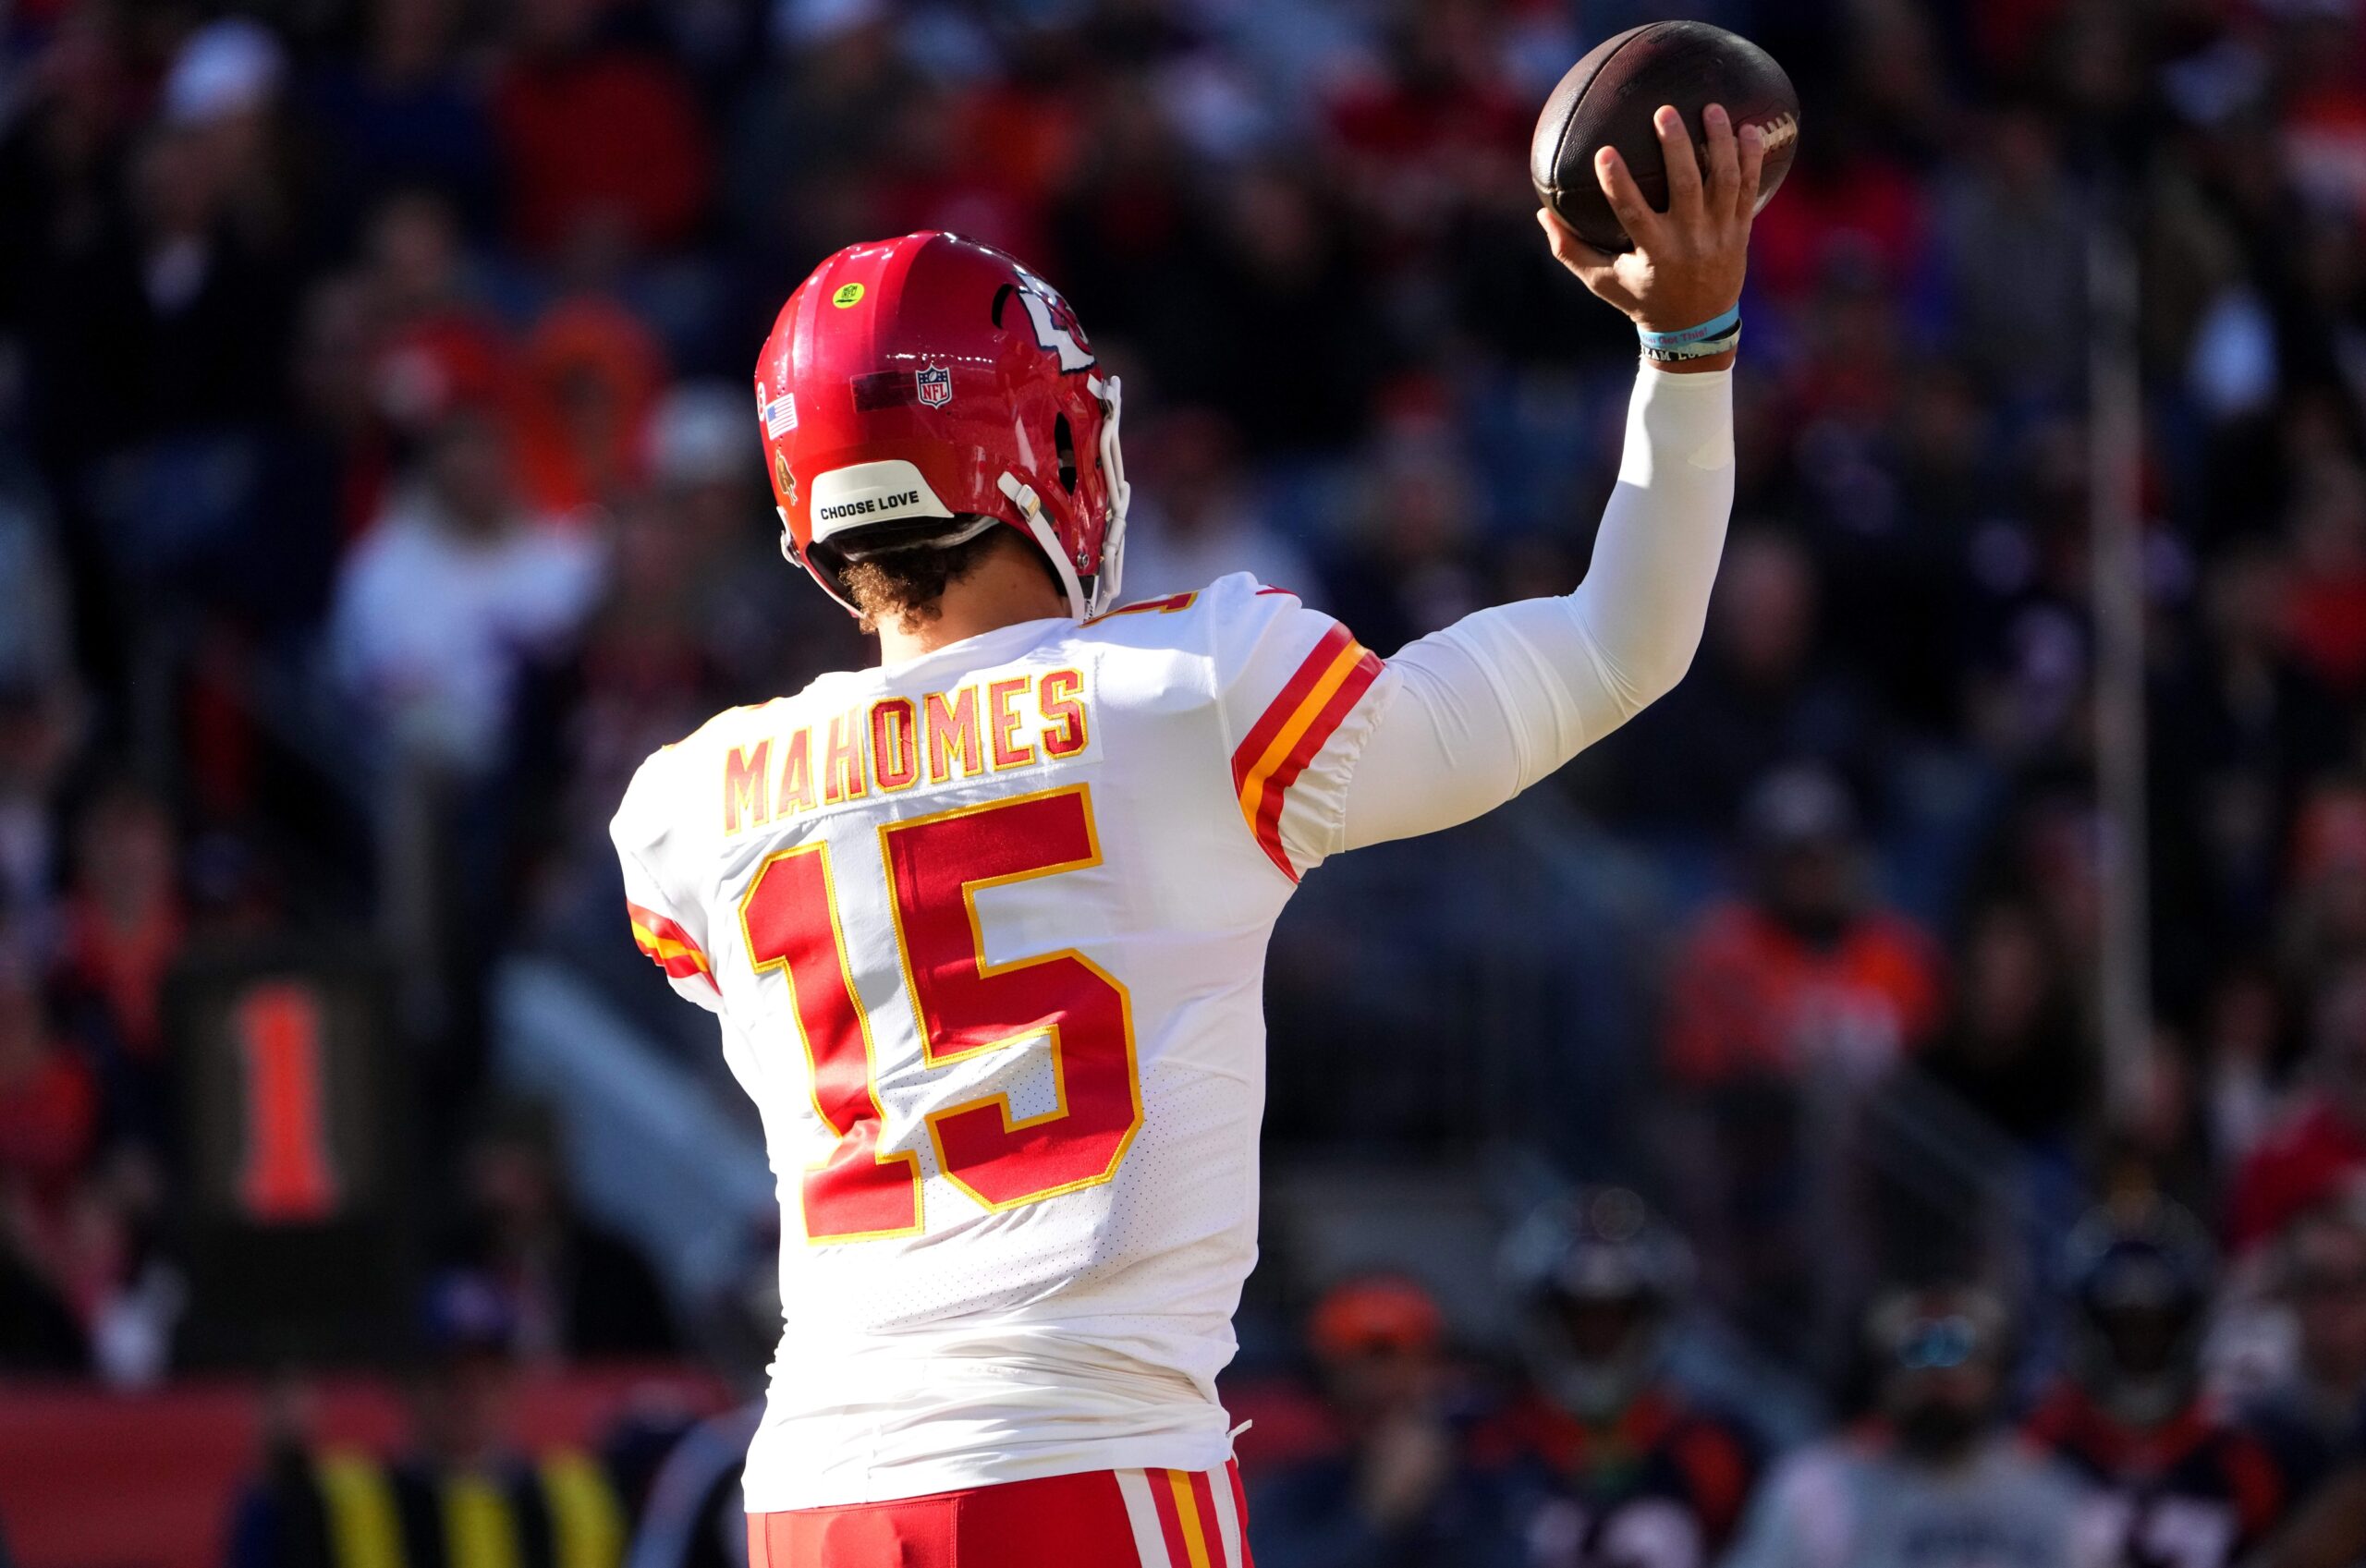 Kansas City Chiefs schedule 2022: Opponents, release date, strength of  schedule, and more